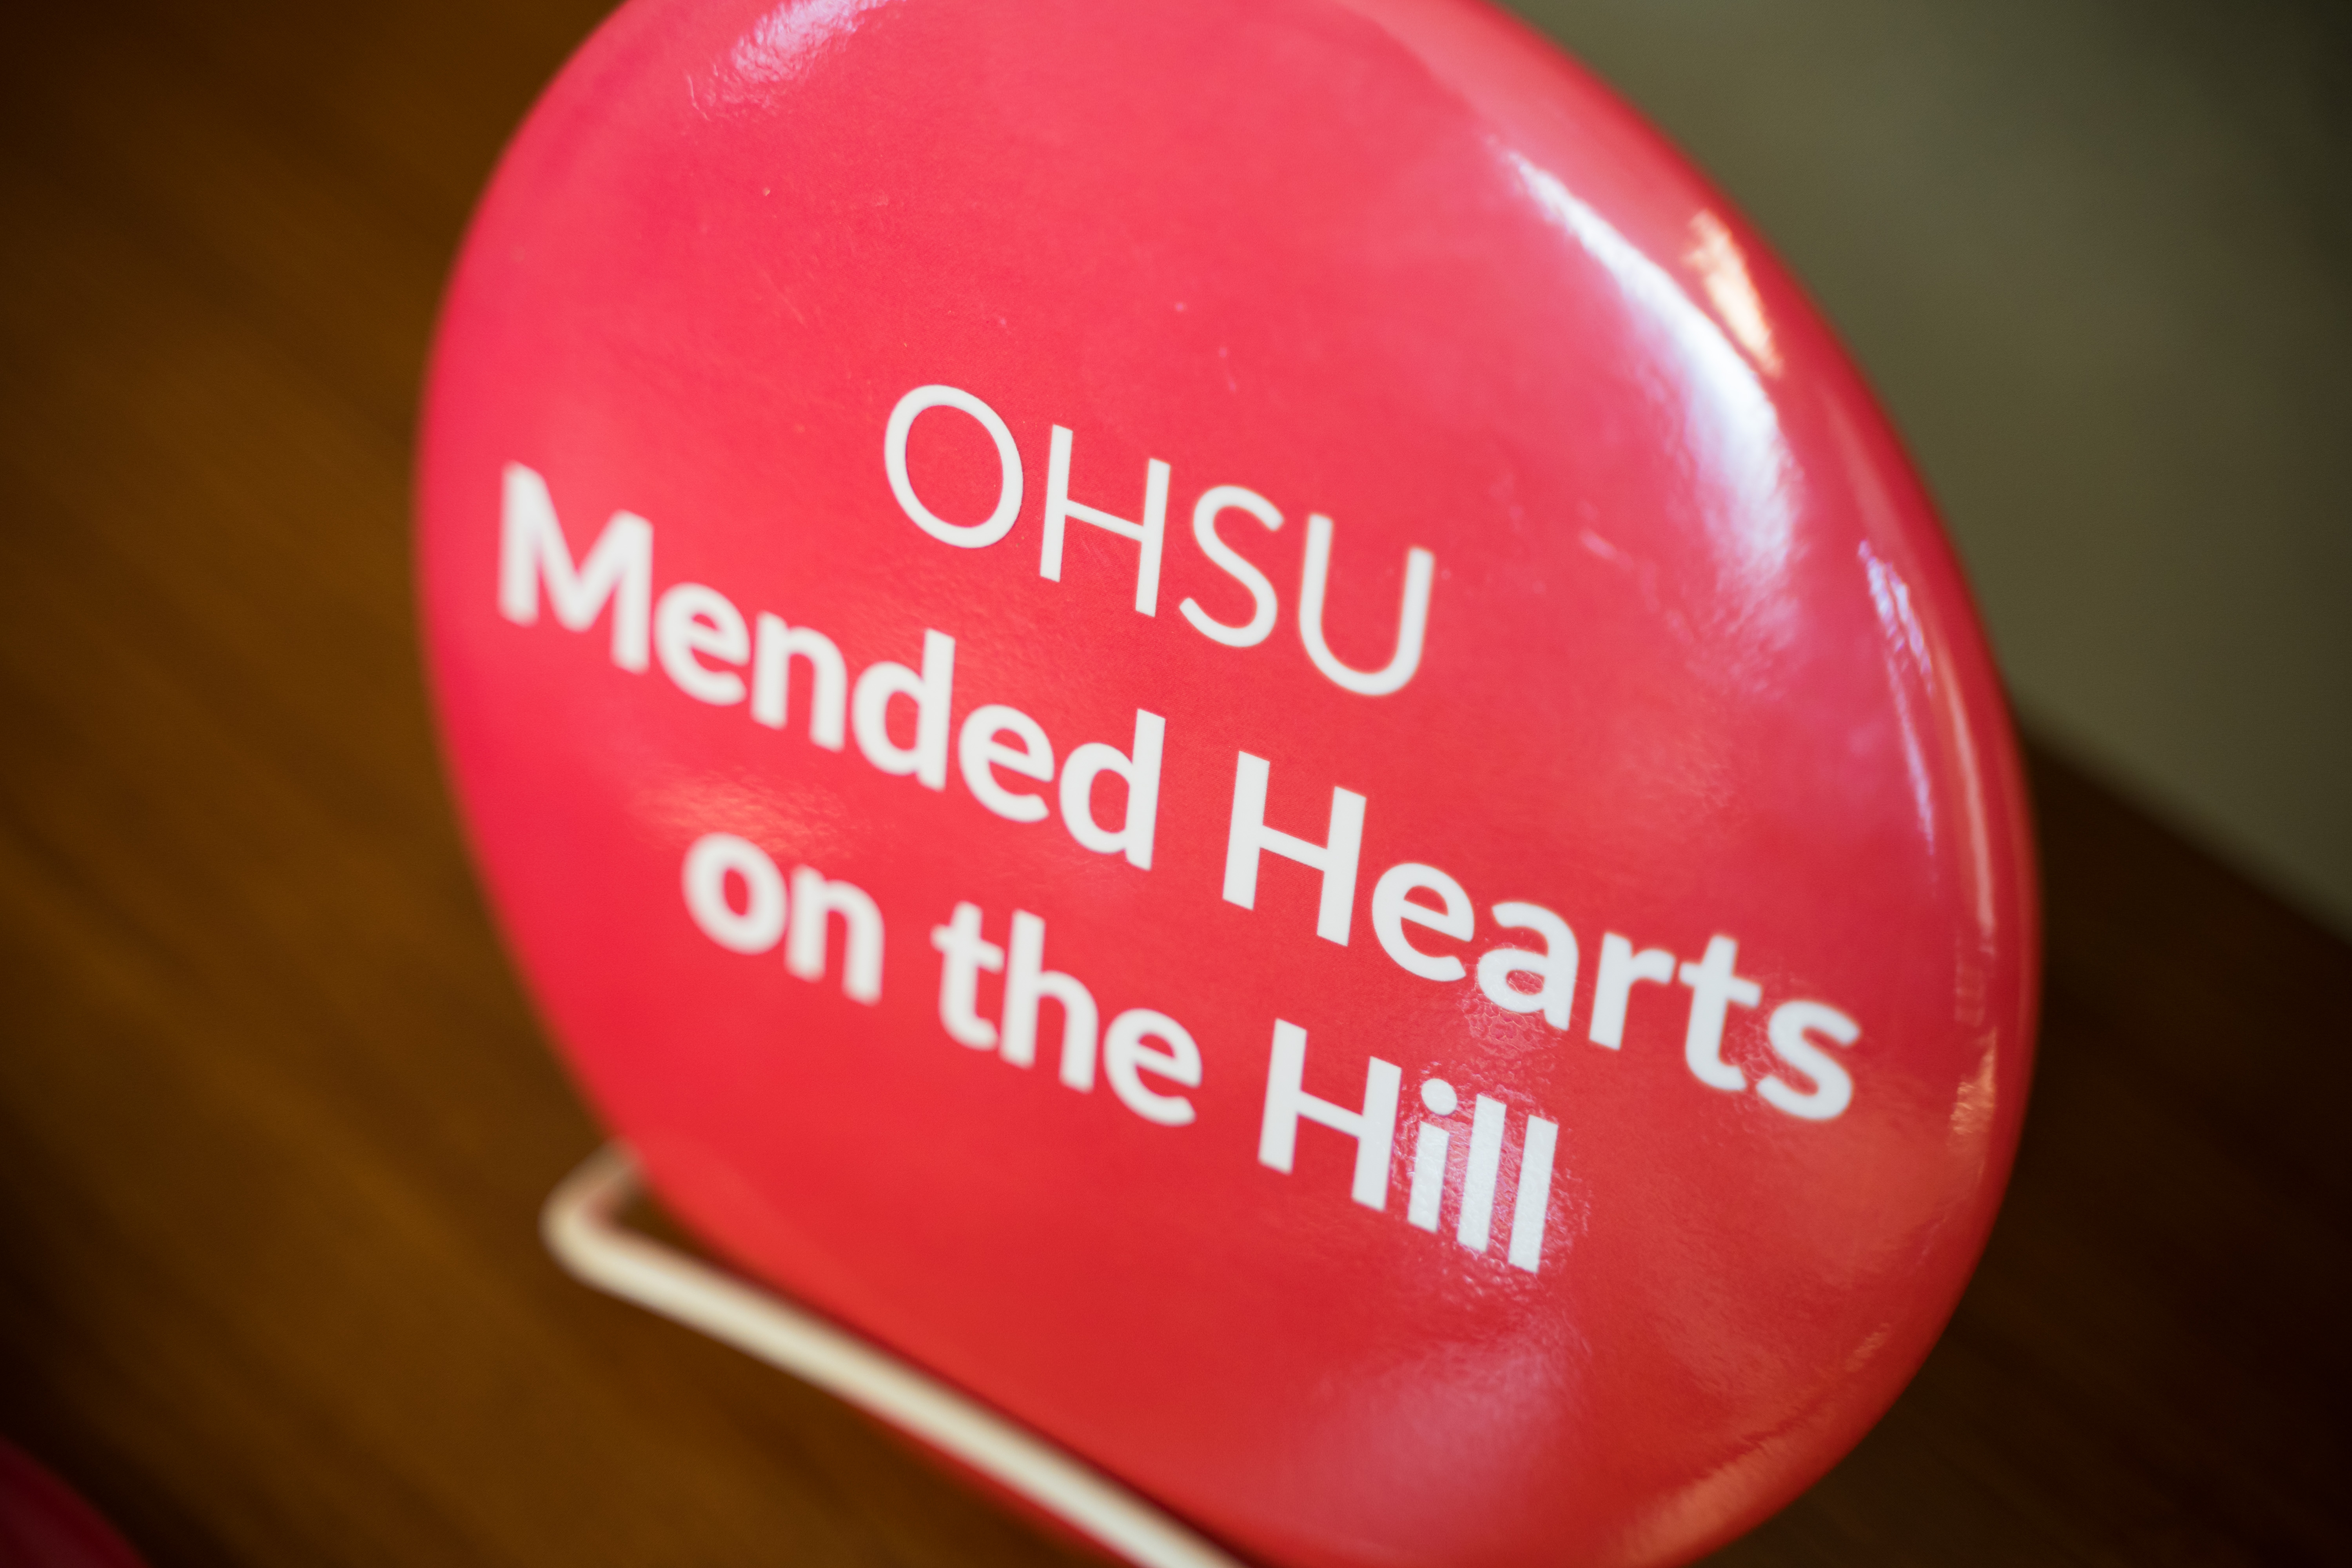 Large button that says OHSU Mended Hearts on the Hill